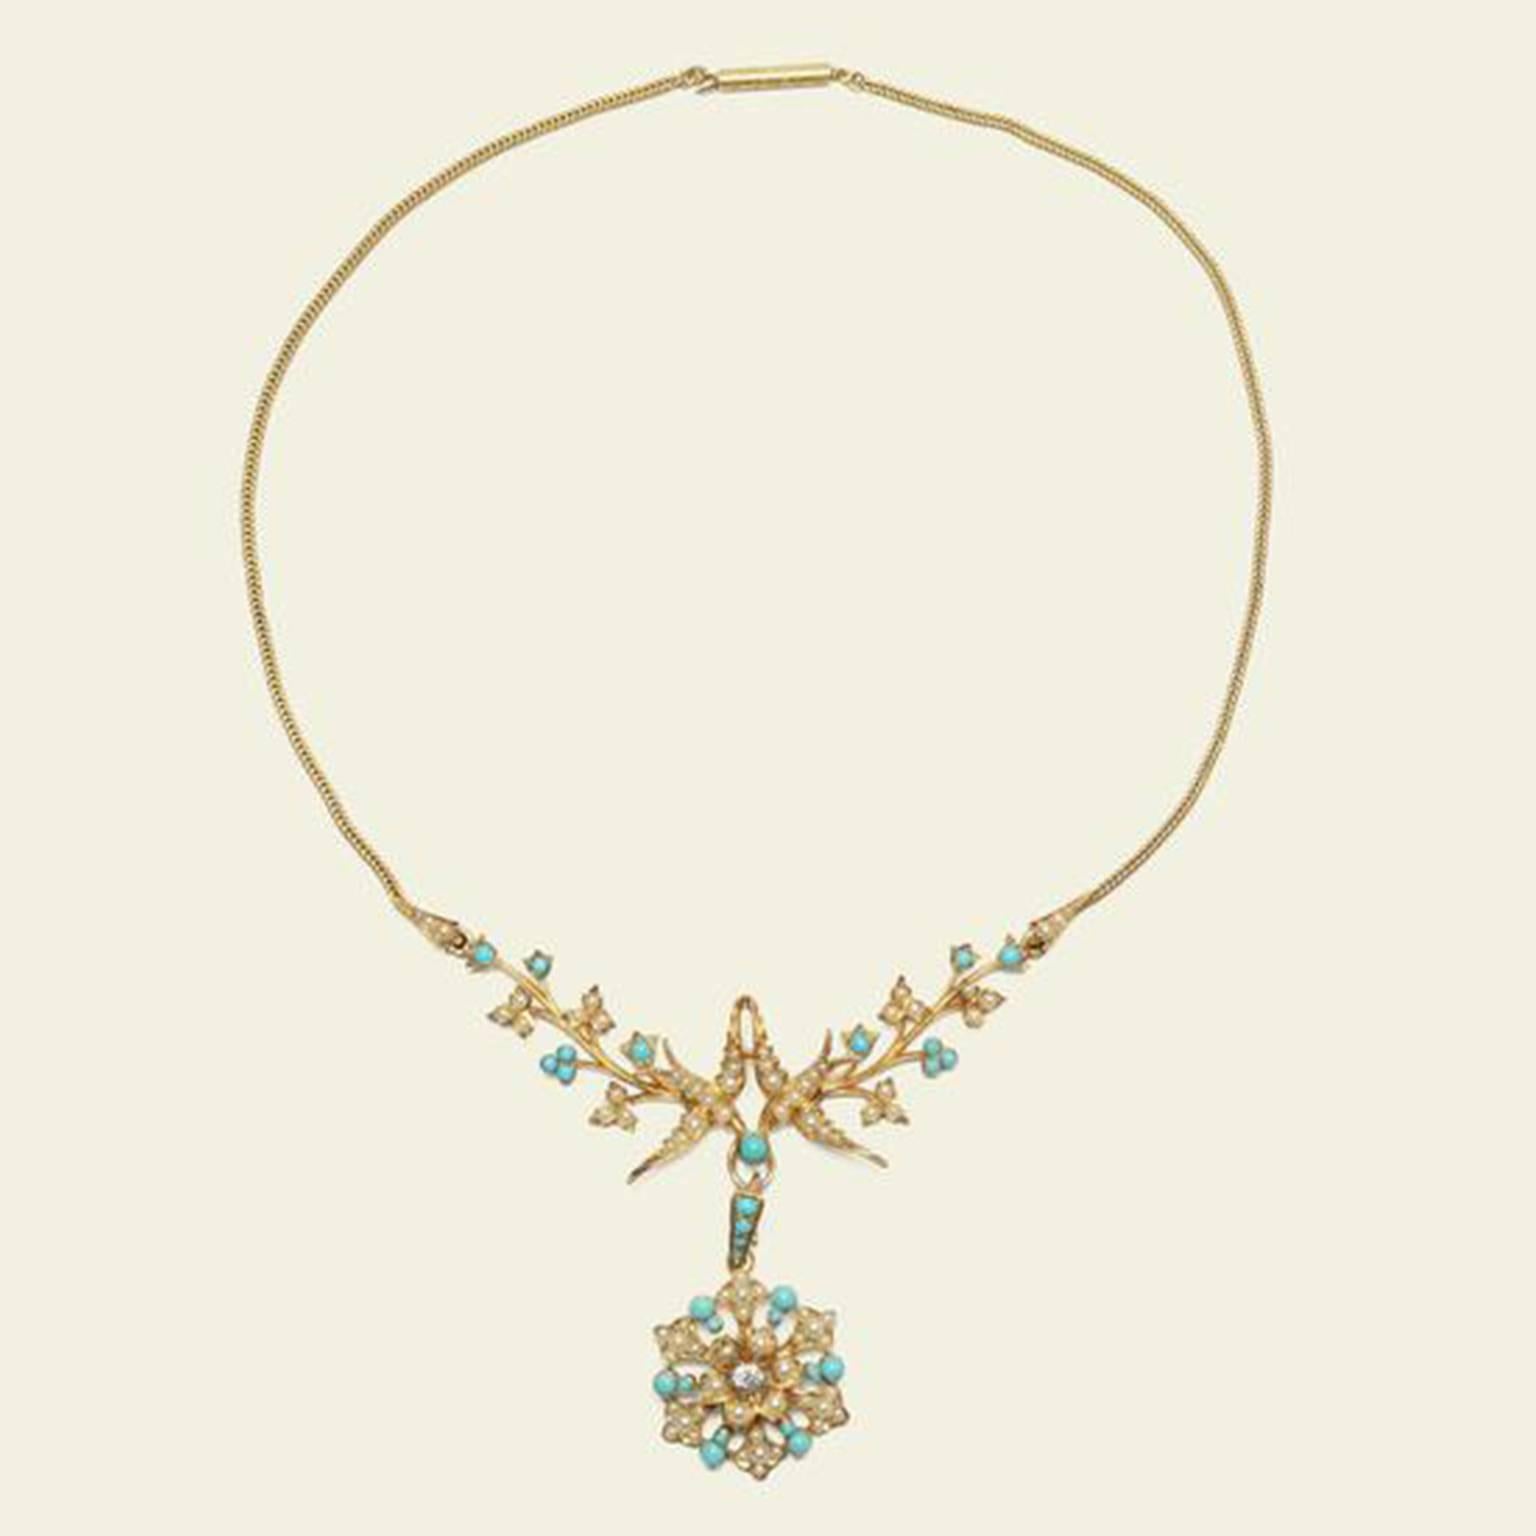 This spectacular Victorian necklace is fashioned in 15k yellow gold and studded with turquoise and seed pearls. Two lovebirds extending from foliate gold branches meet at the center of the necklace, from their joined beaks hangs an exquisite